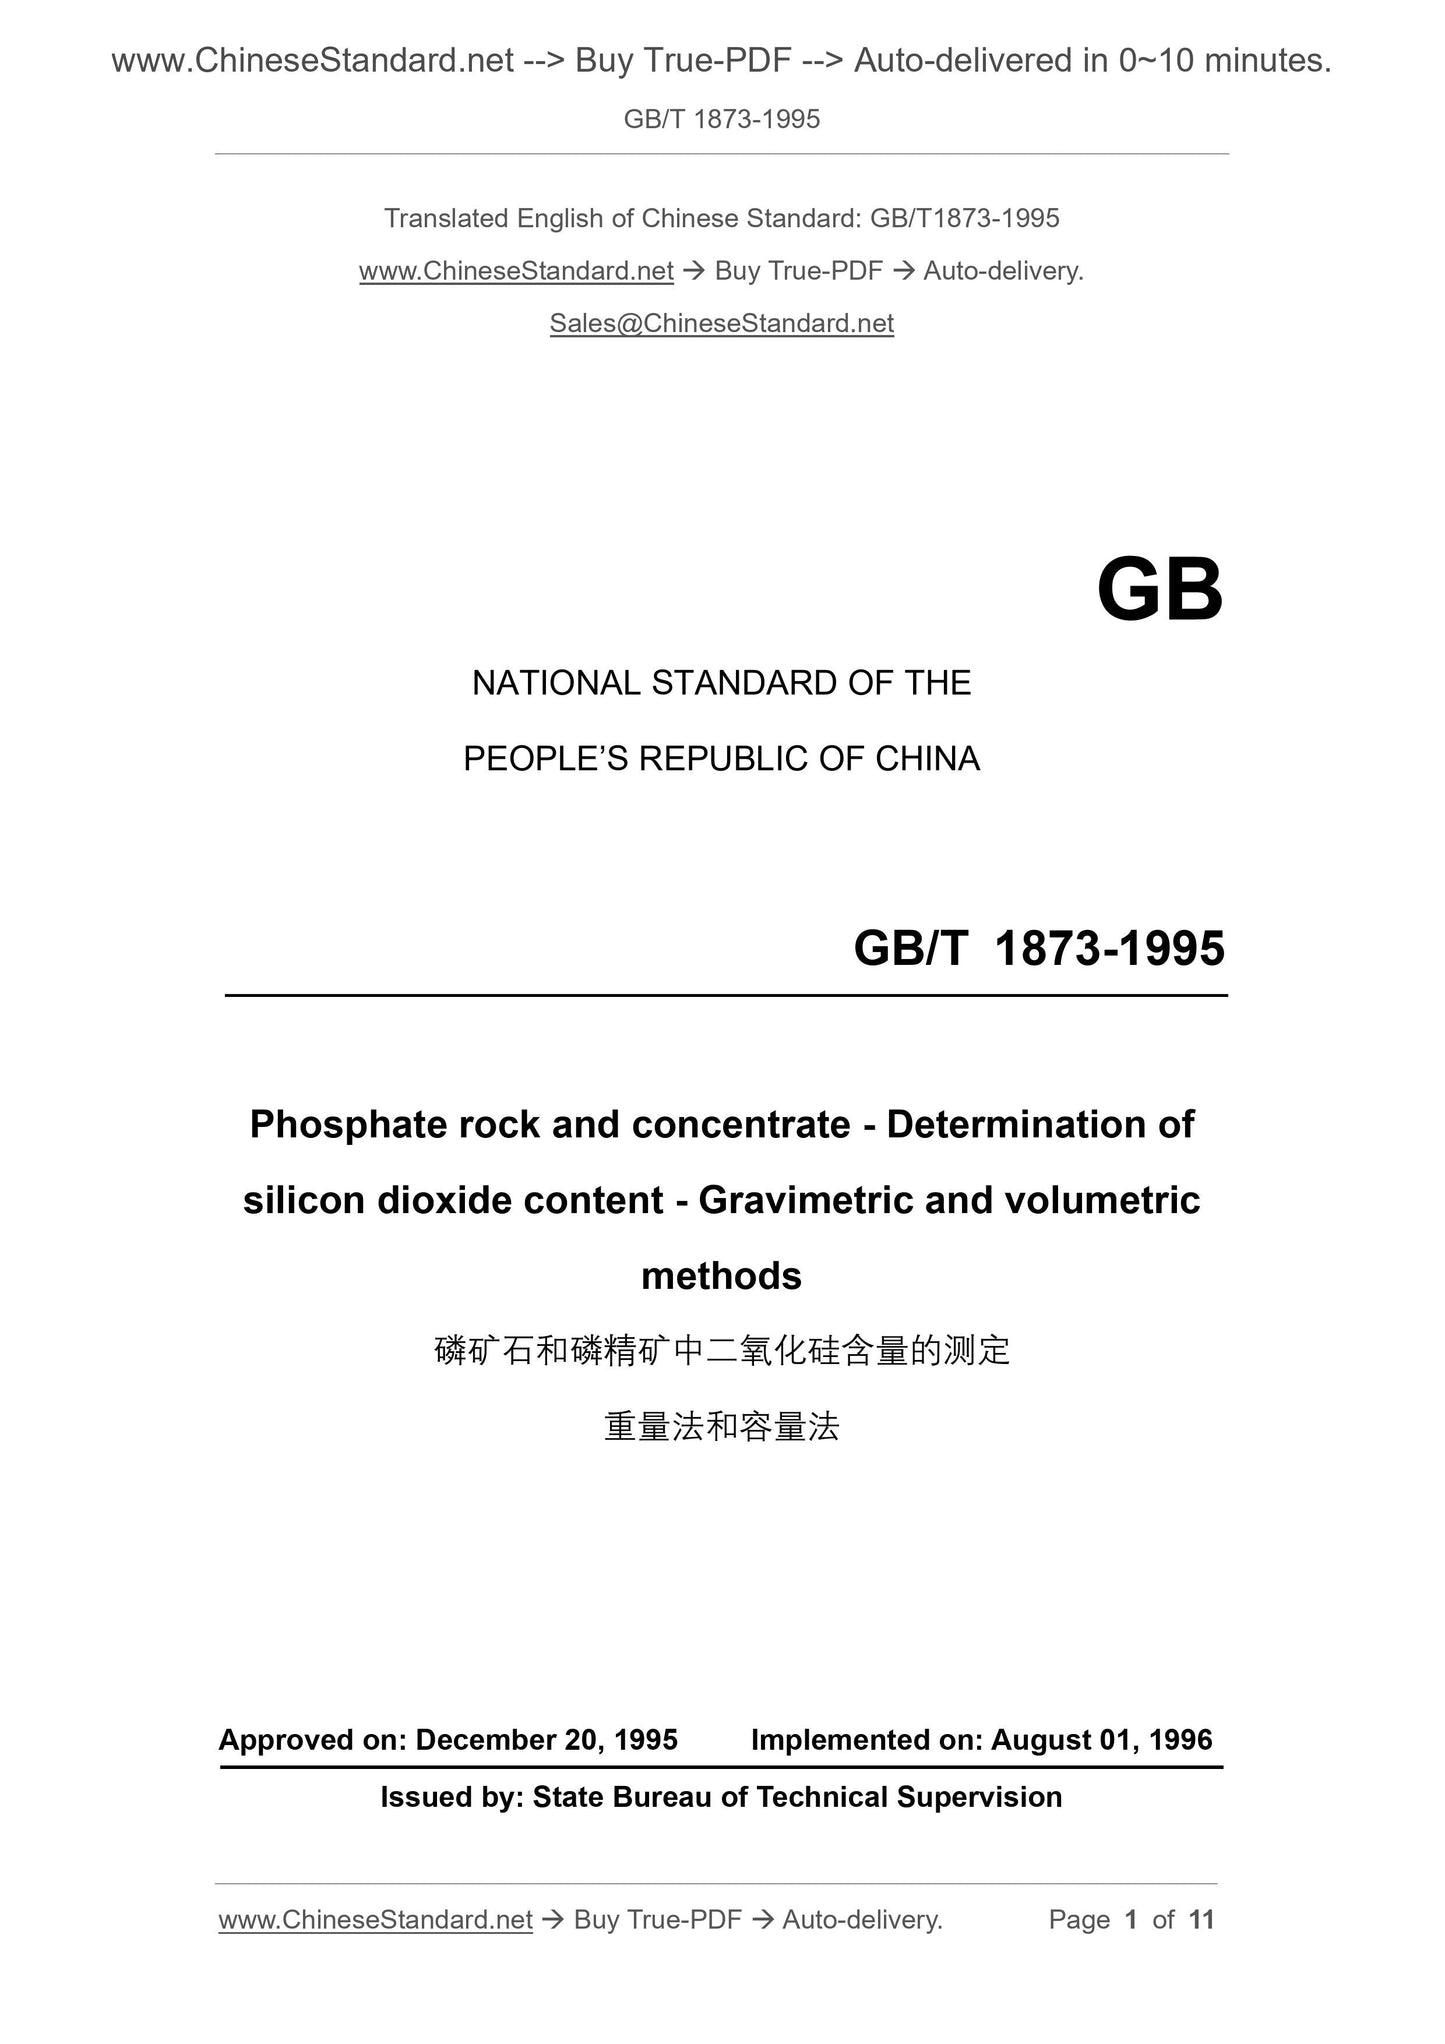 GB/T 1873-1995 Page 1